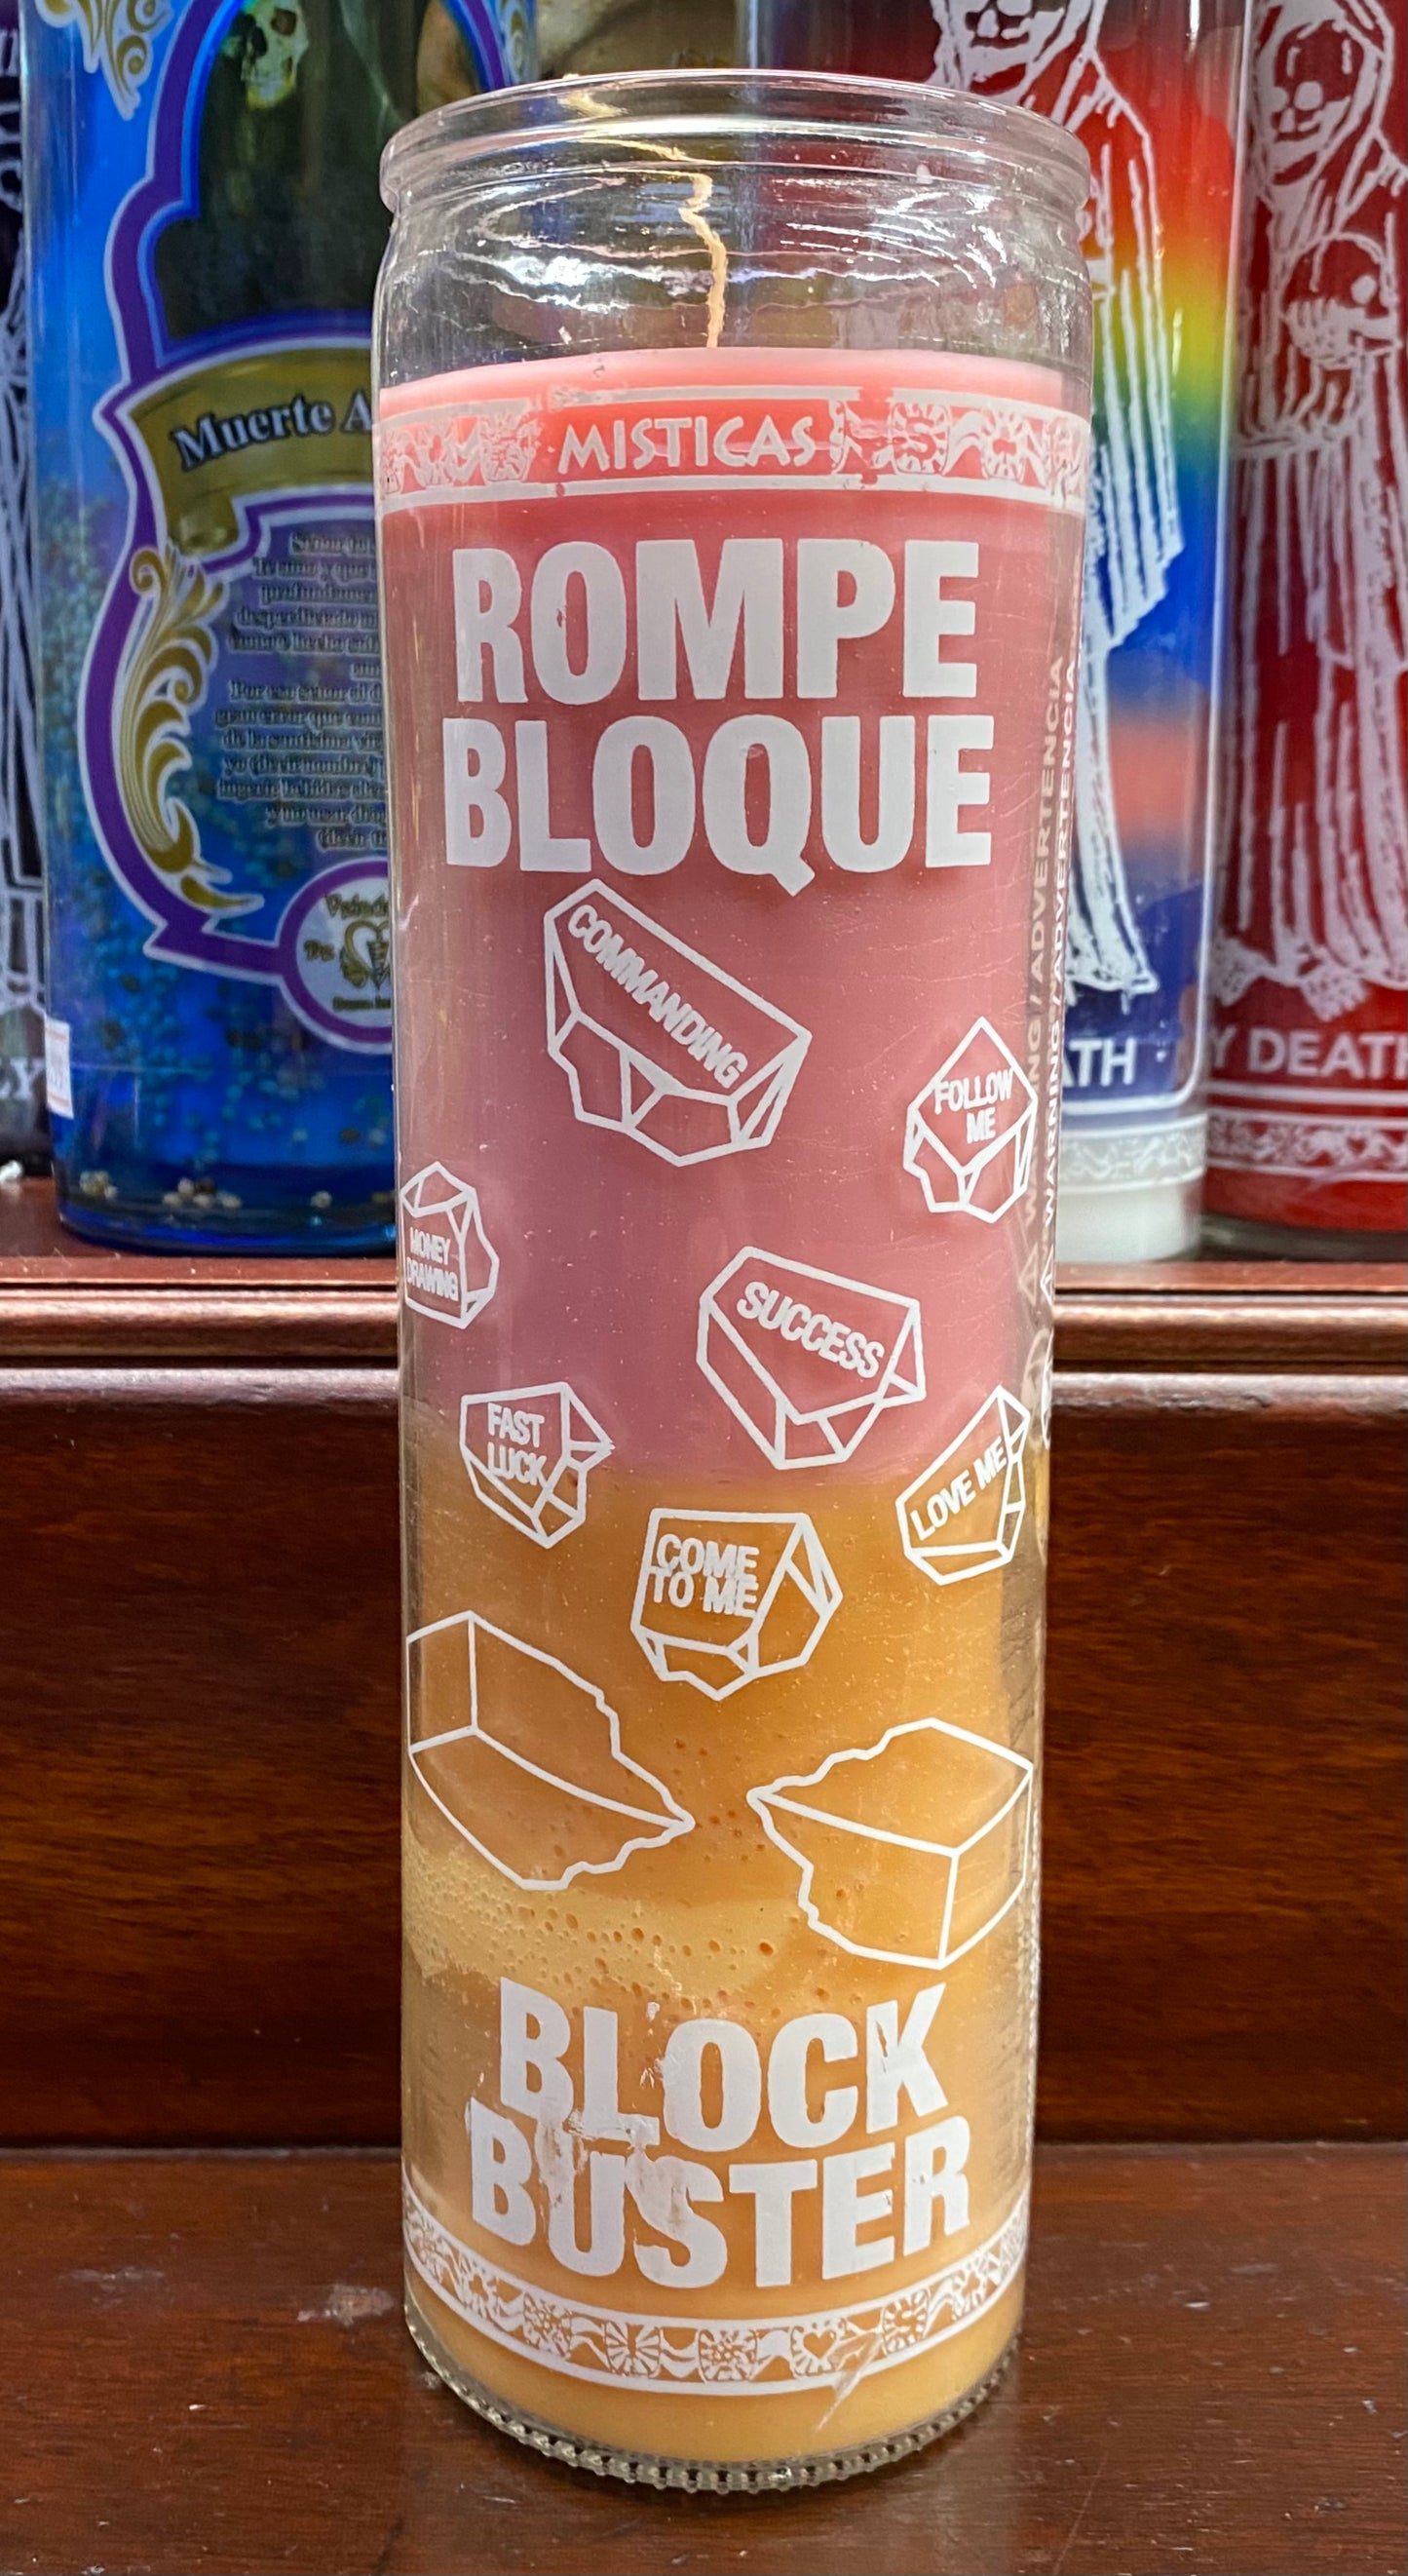 Rompe Bloque/ Block Buster Candle